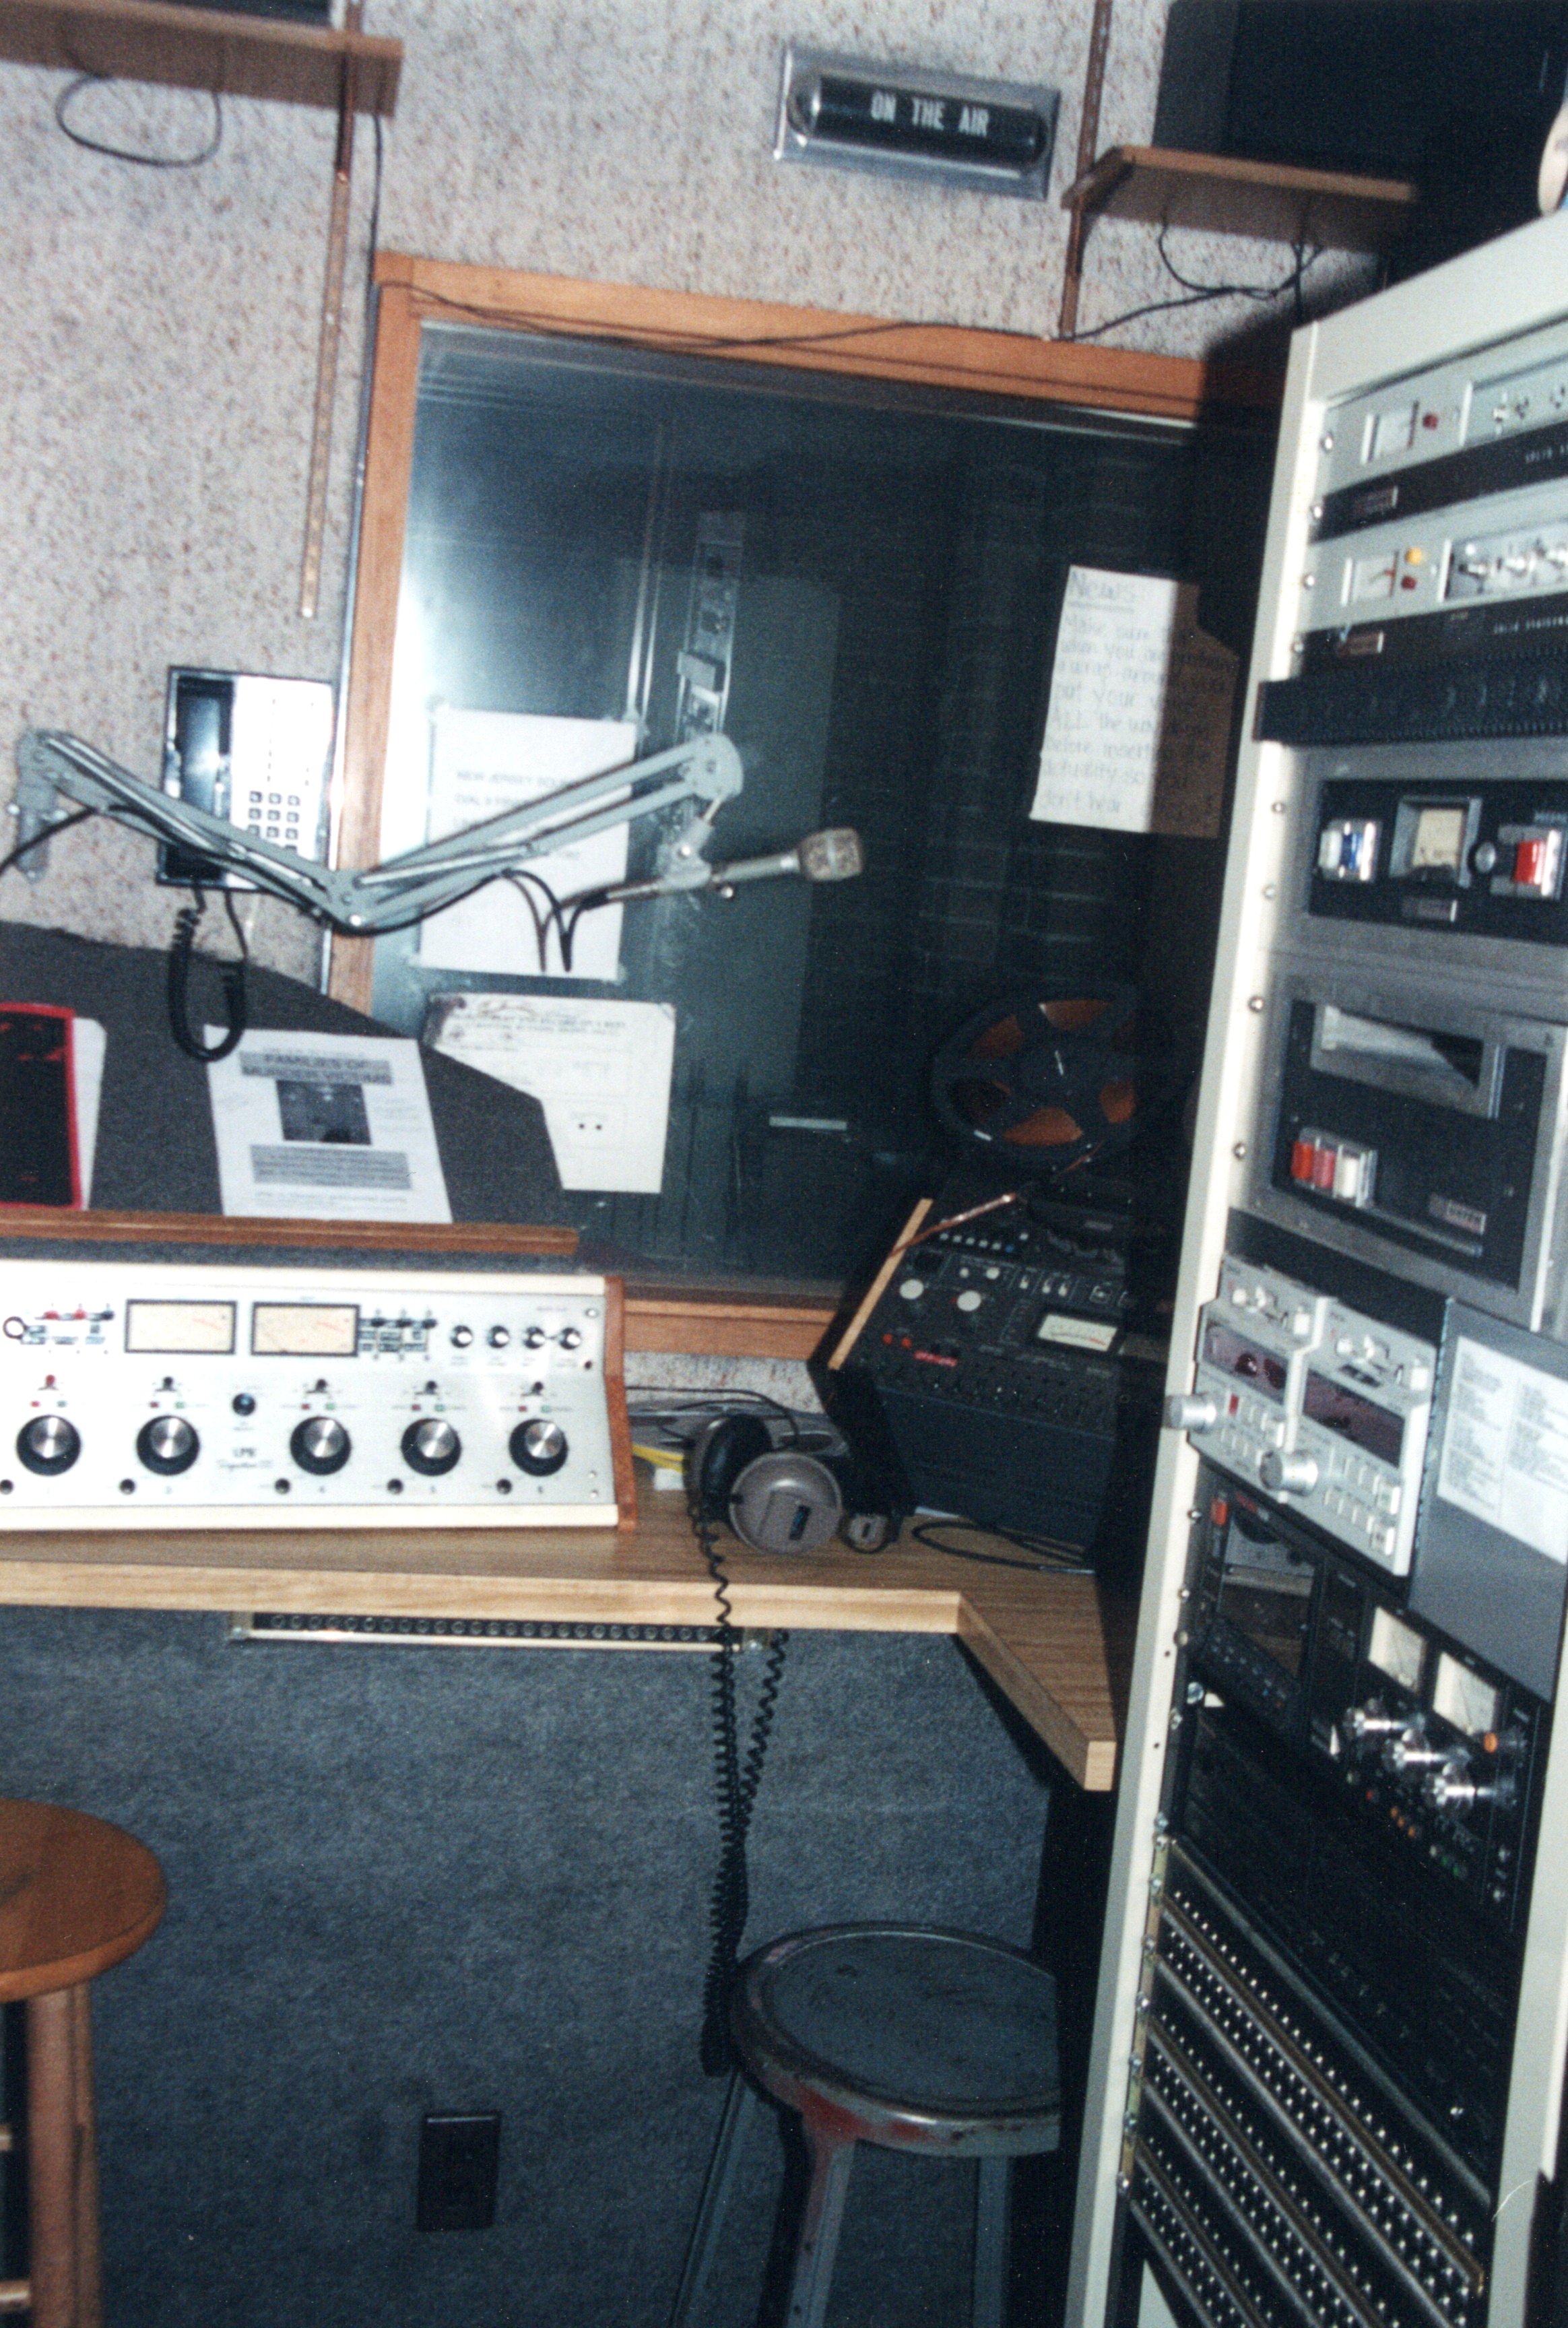 2002 - News Production still with the Reel to Reel.